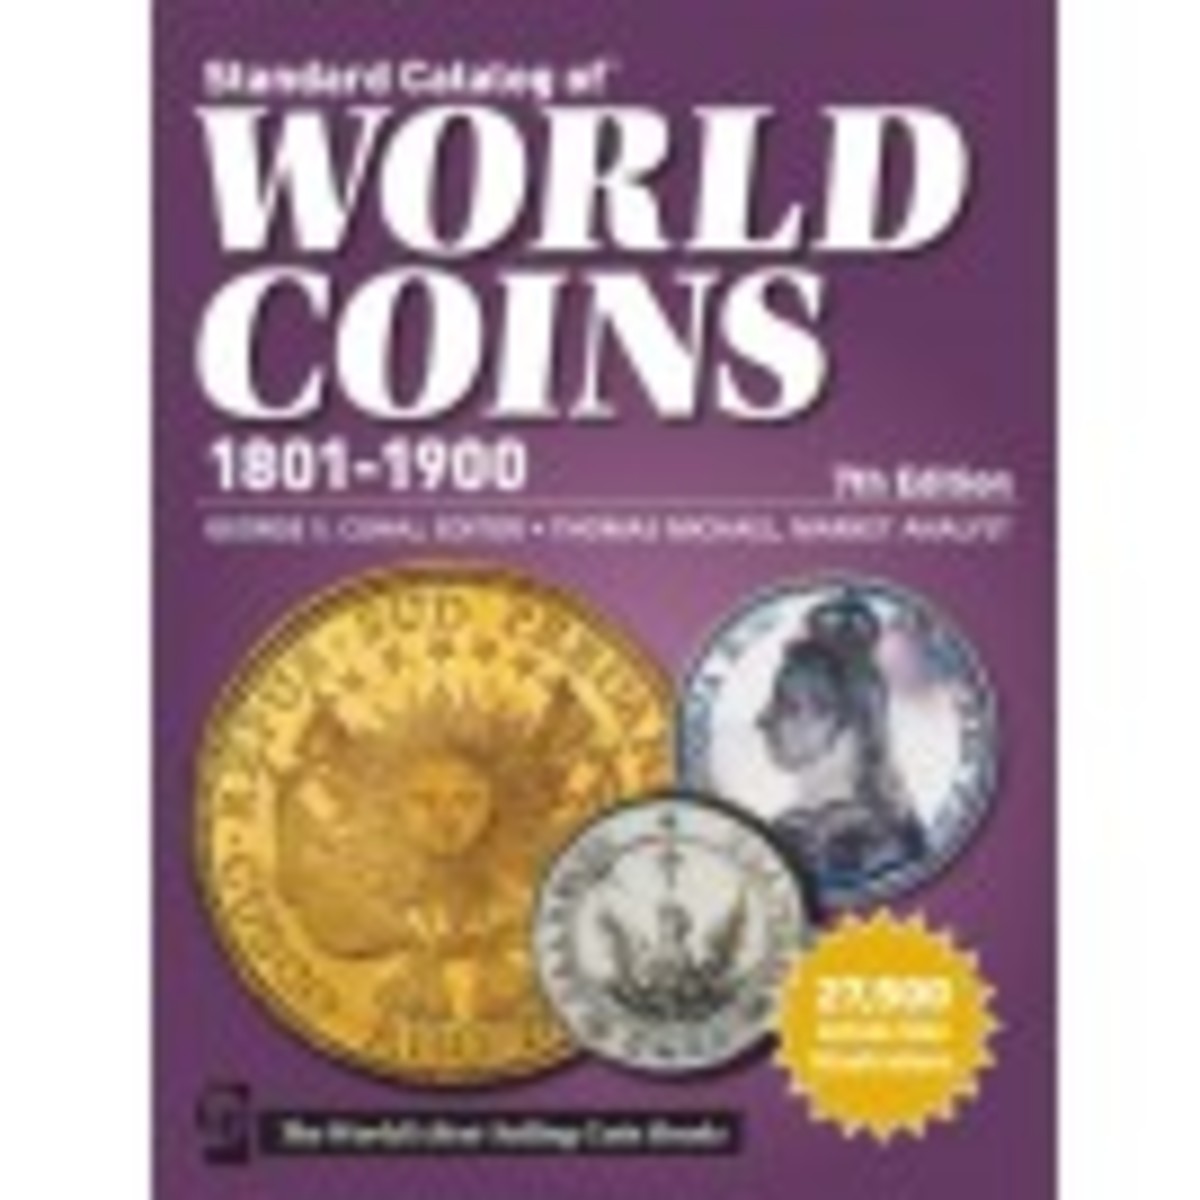 Standard Catalog of World Coins 1801-1900, 7th Edition